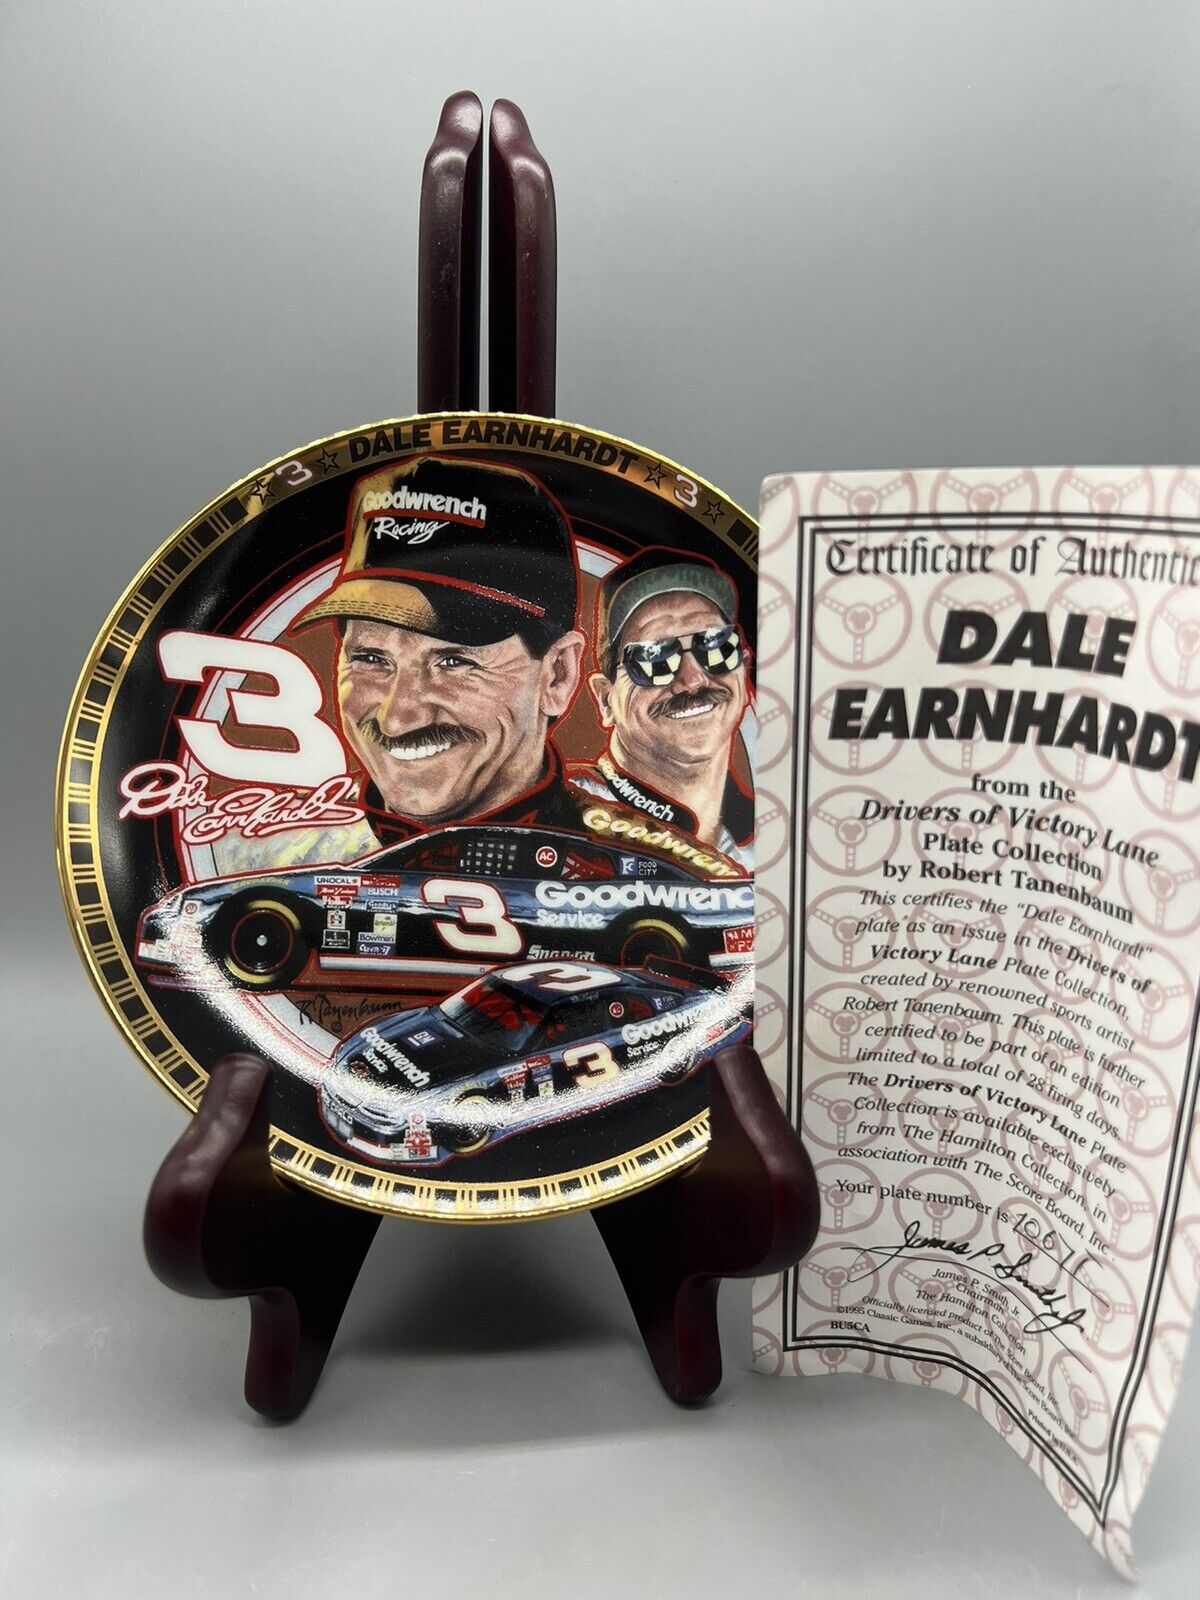 1995 Dale Earnhardt #3 Plate from The Drivers of Victory Lane Collection w/ COA